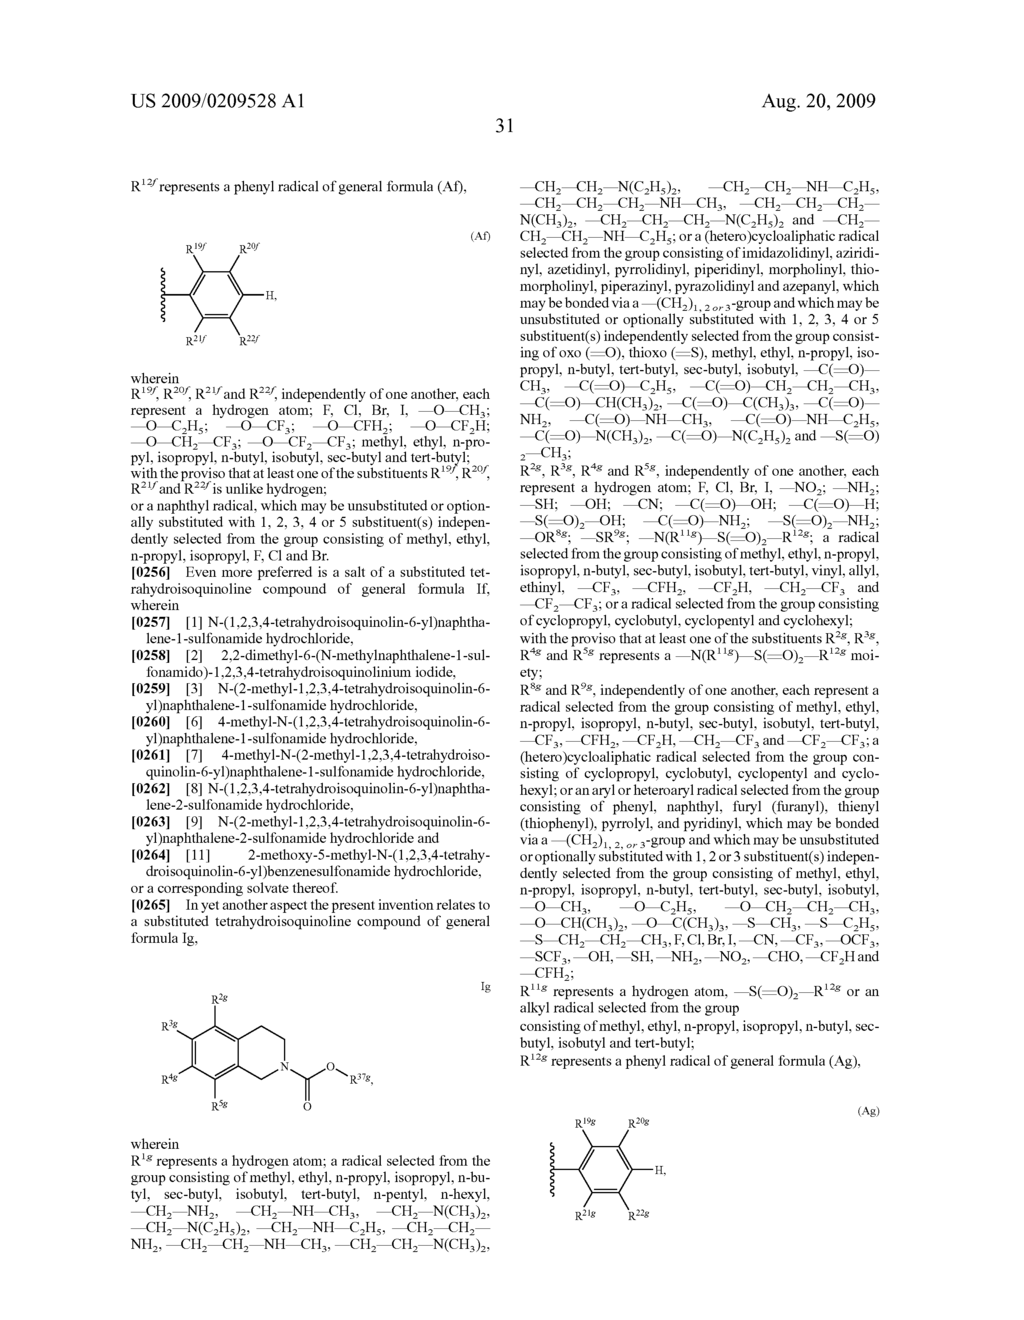 SUBSTITUTED TETRAHYDROISOQUINOLINE COMPOUND, THEIR PREPARATION AND USE IN MEDICAMENTS - diagram, schematic, and image 32